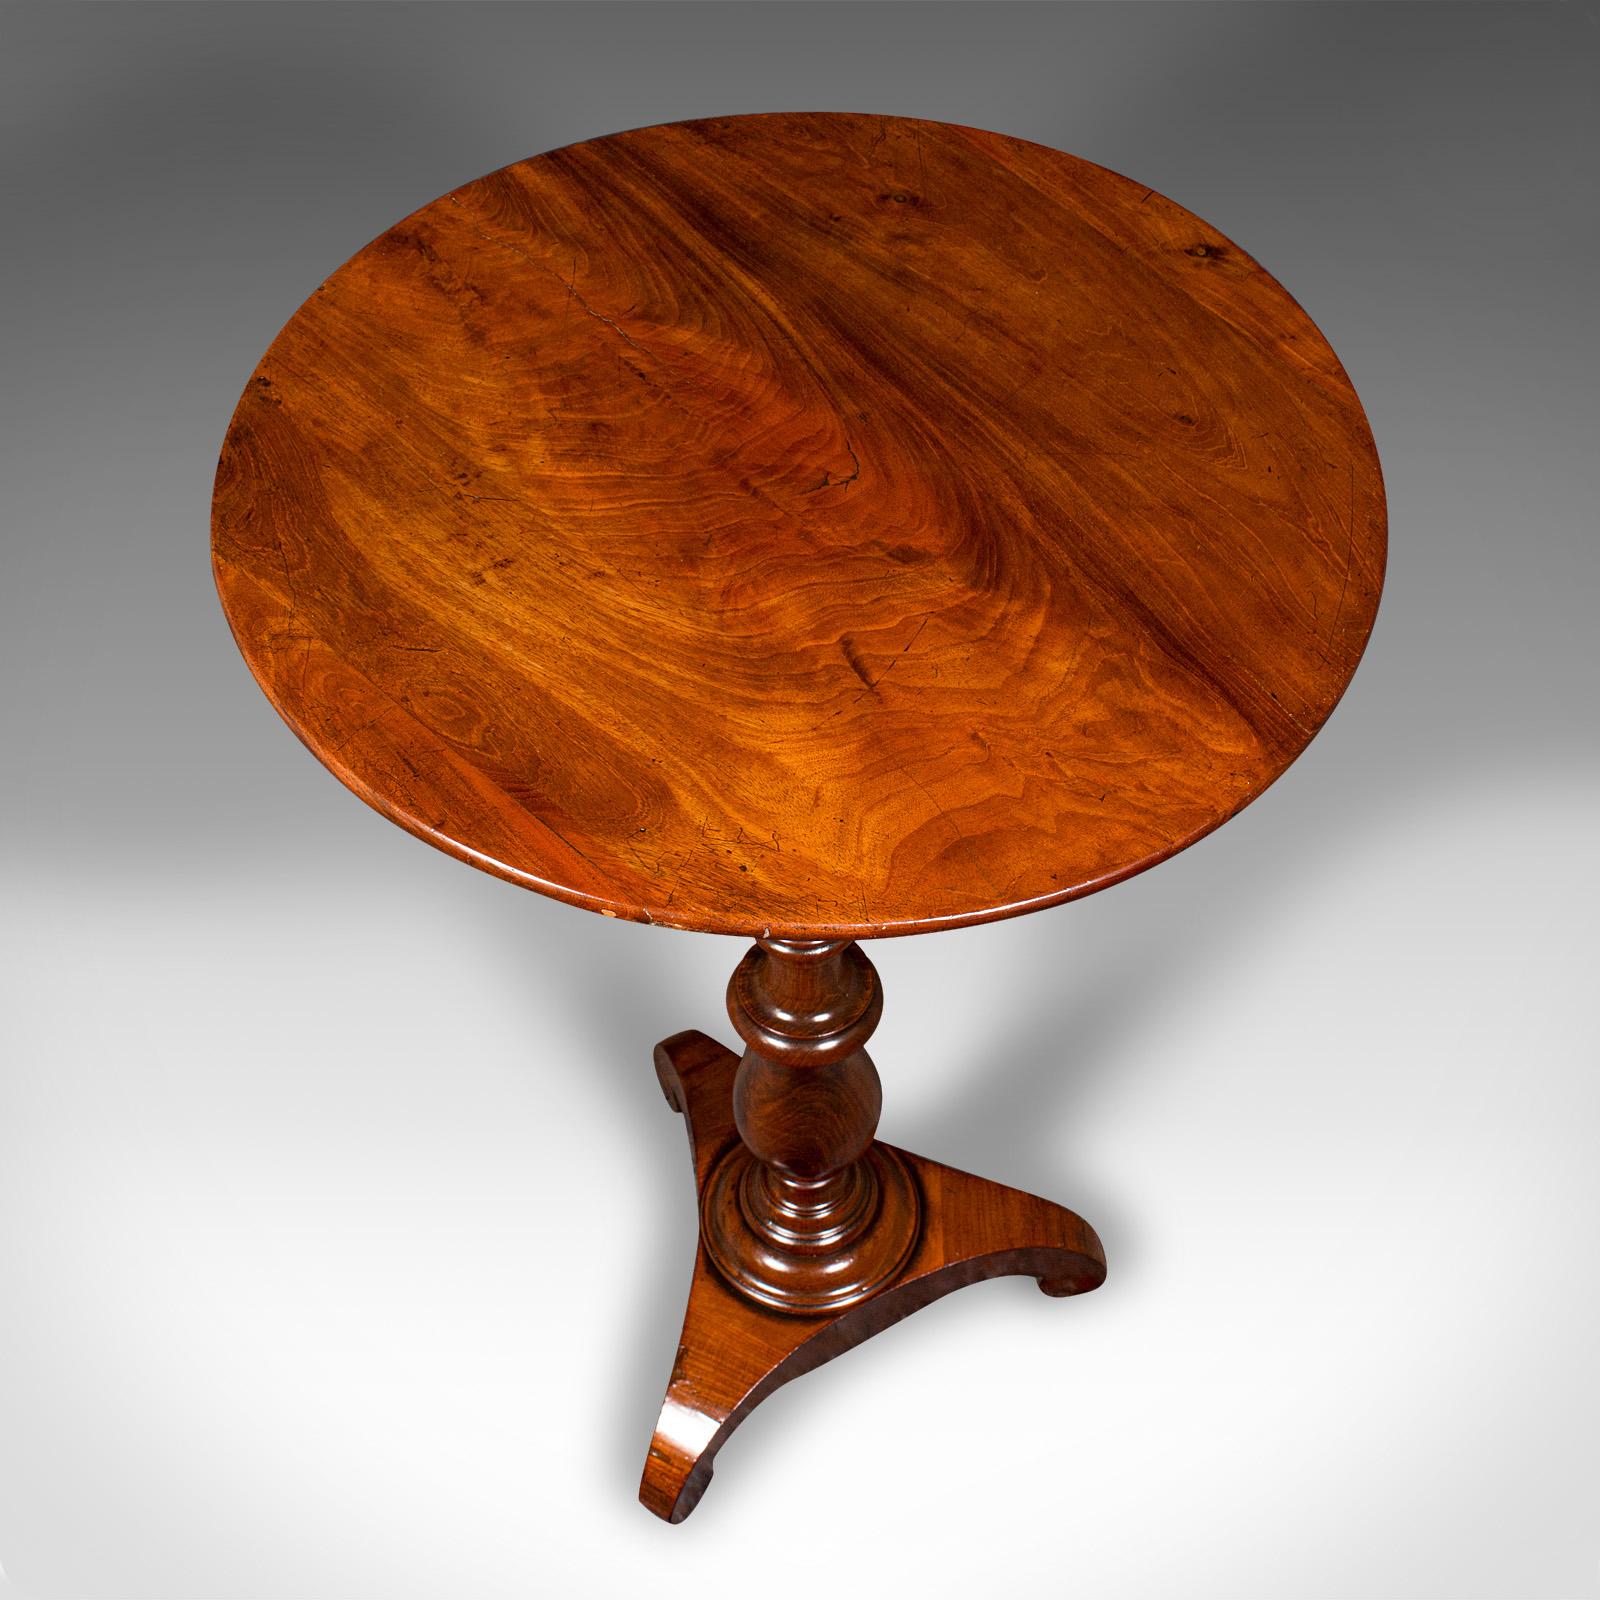 Wood Small Antique Lamp Table, English, Flame, Wine, Occasional, Regency, Circa 1820